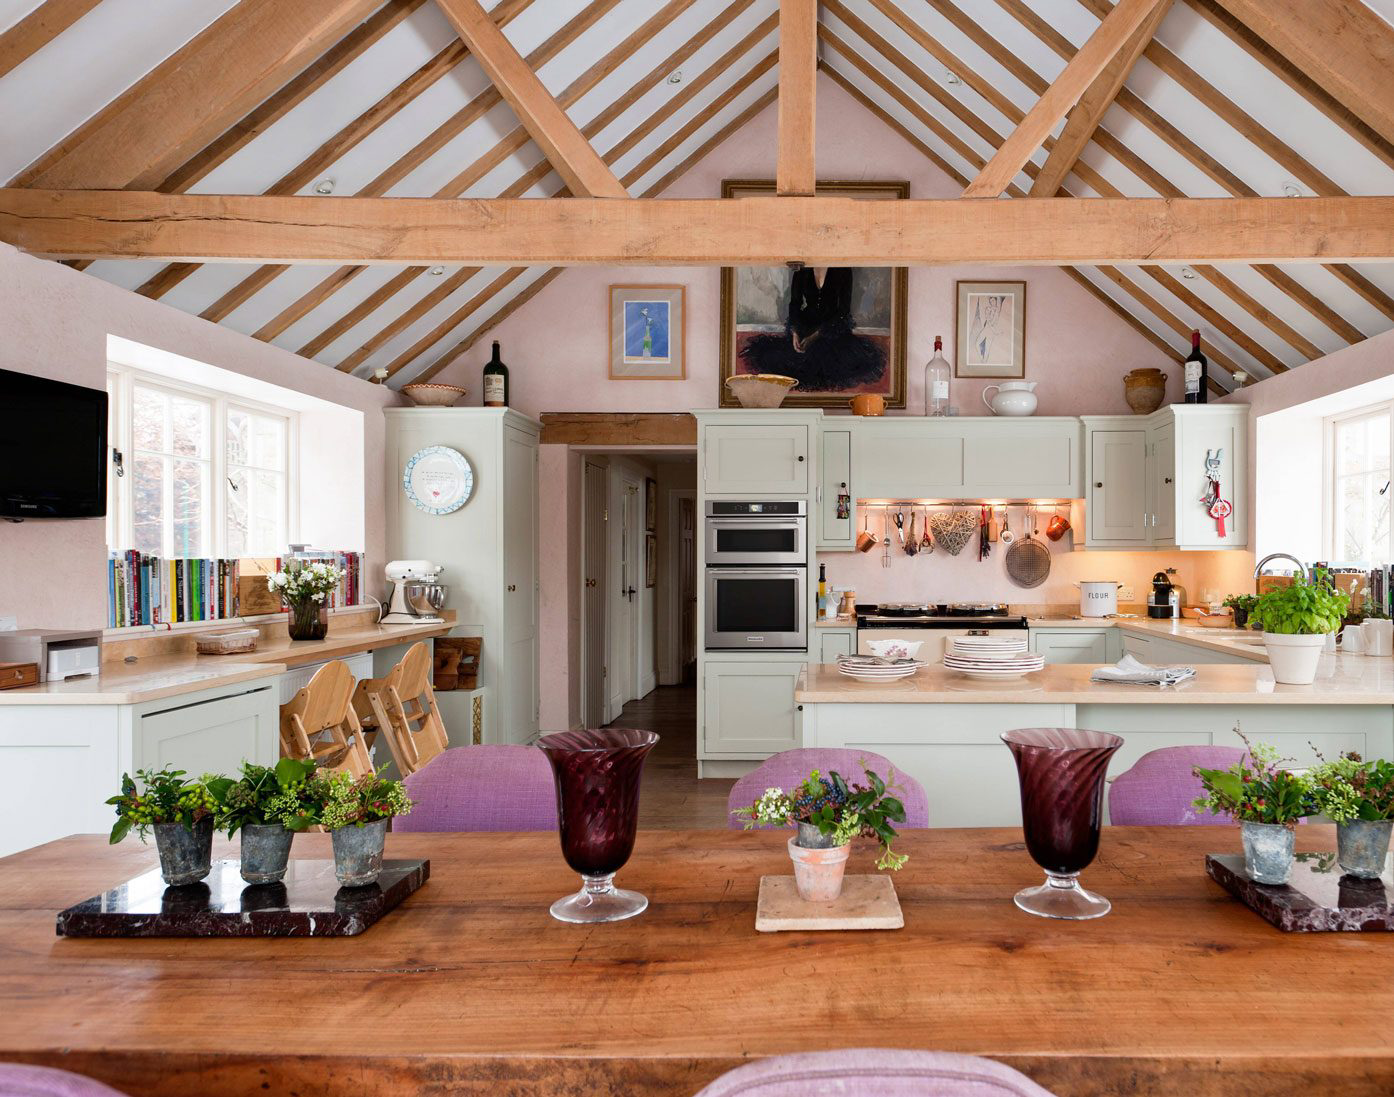 A bright kitchen with soft beetroot shades.